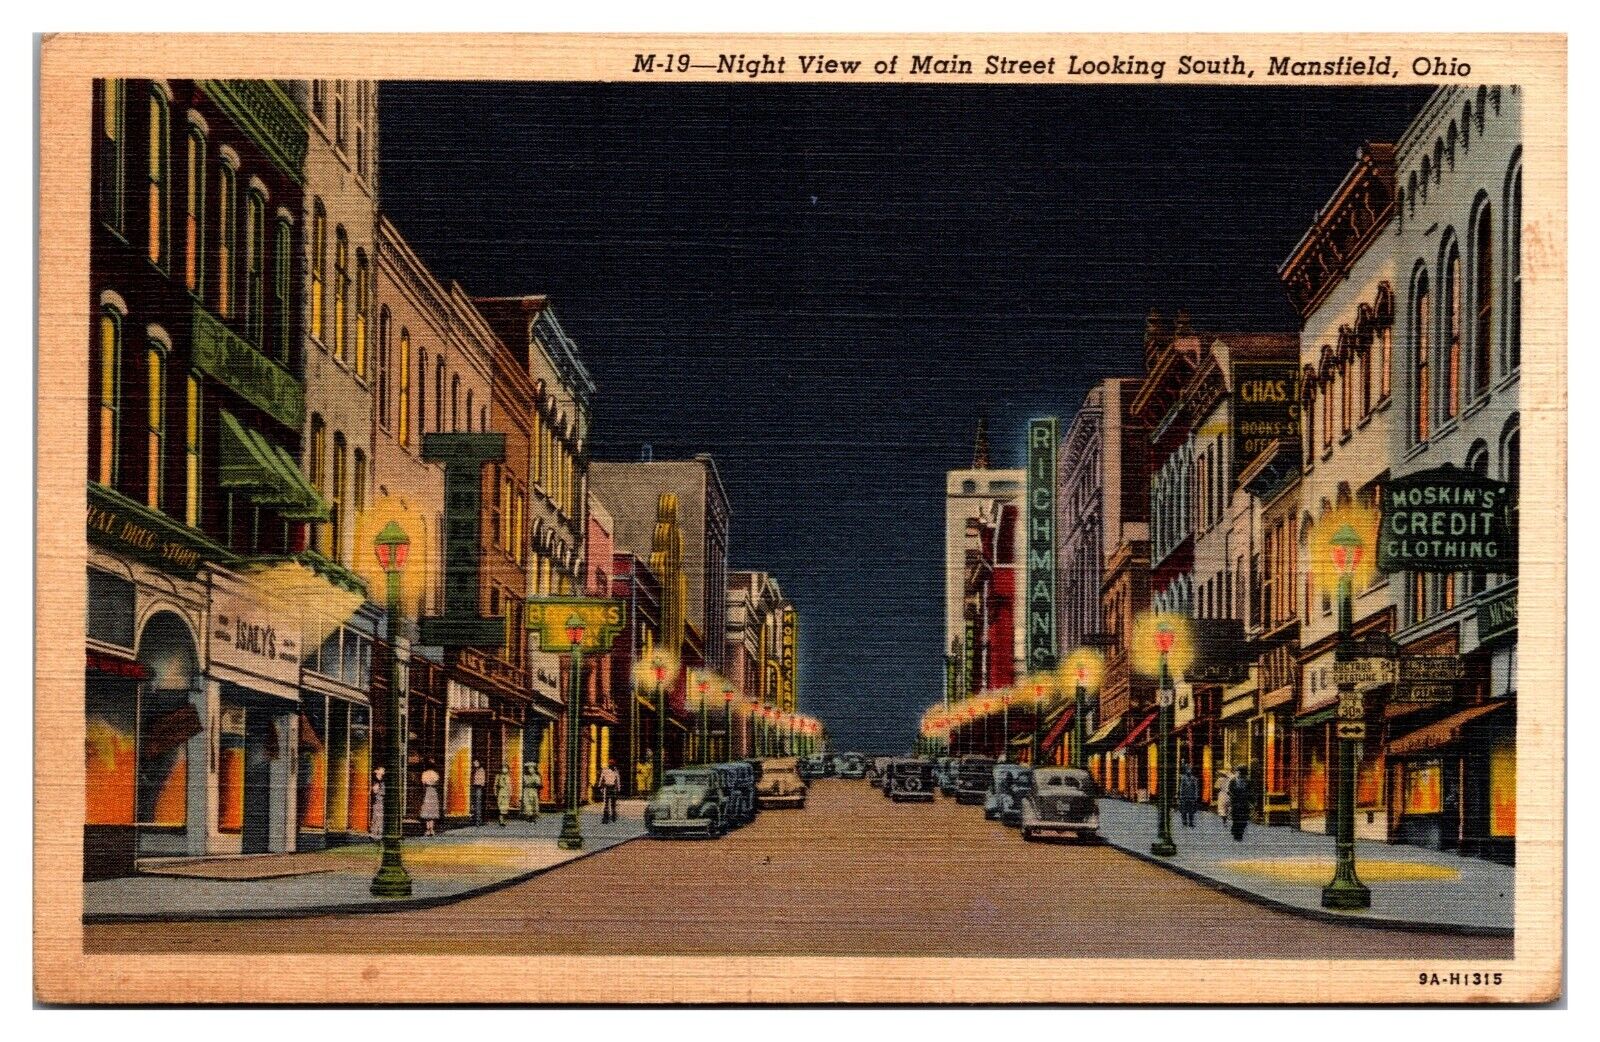 1939 Night View of Main Street, Neon Signs, Ads, Mansfield, OH Postcard